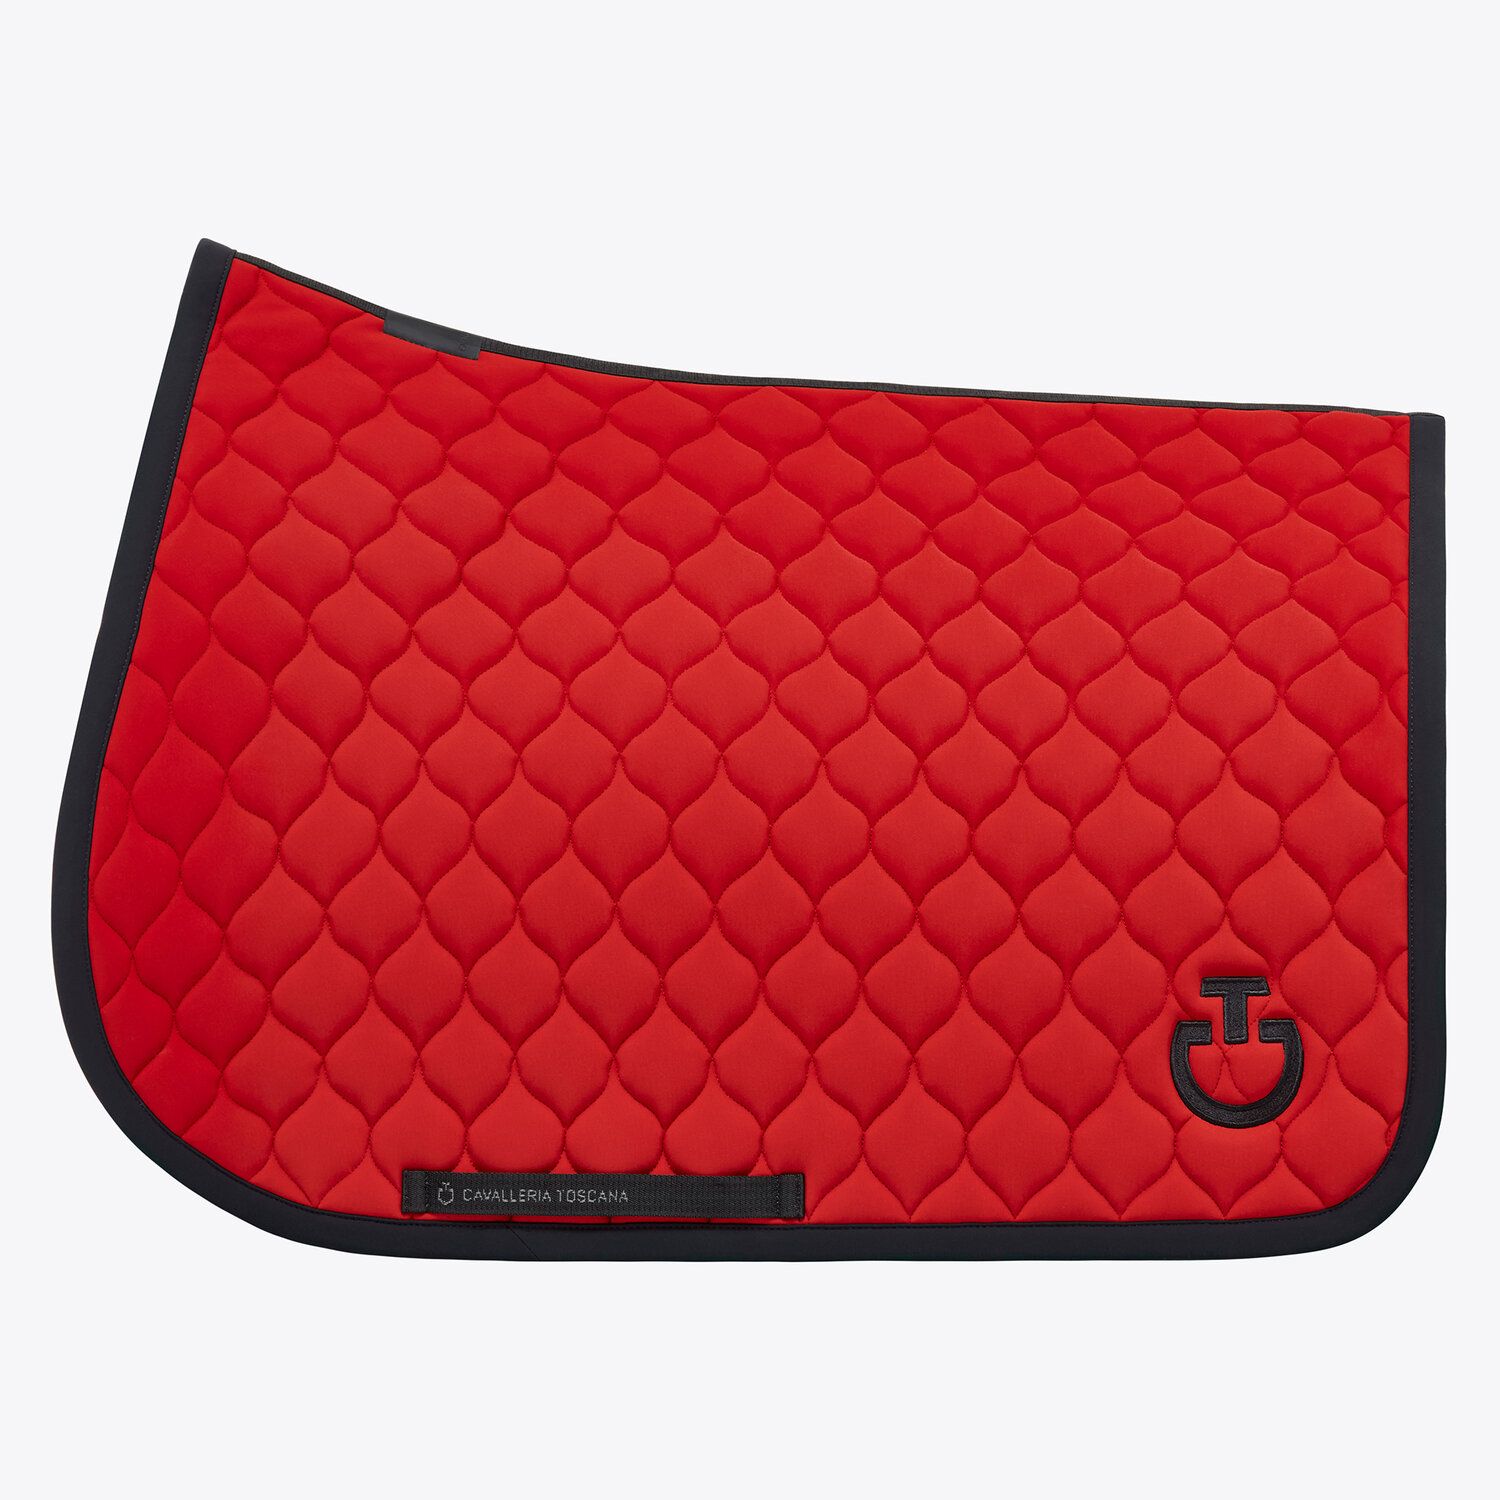 CIRCULAR QUILTED JERSEY JUMPING SADDLE PAD RED/BLACK